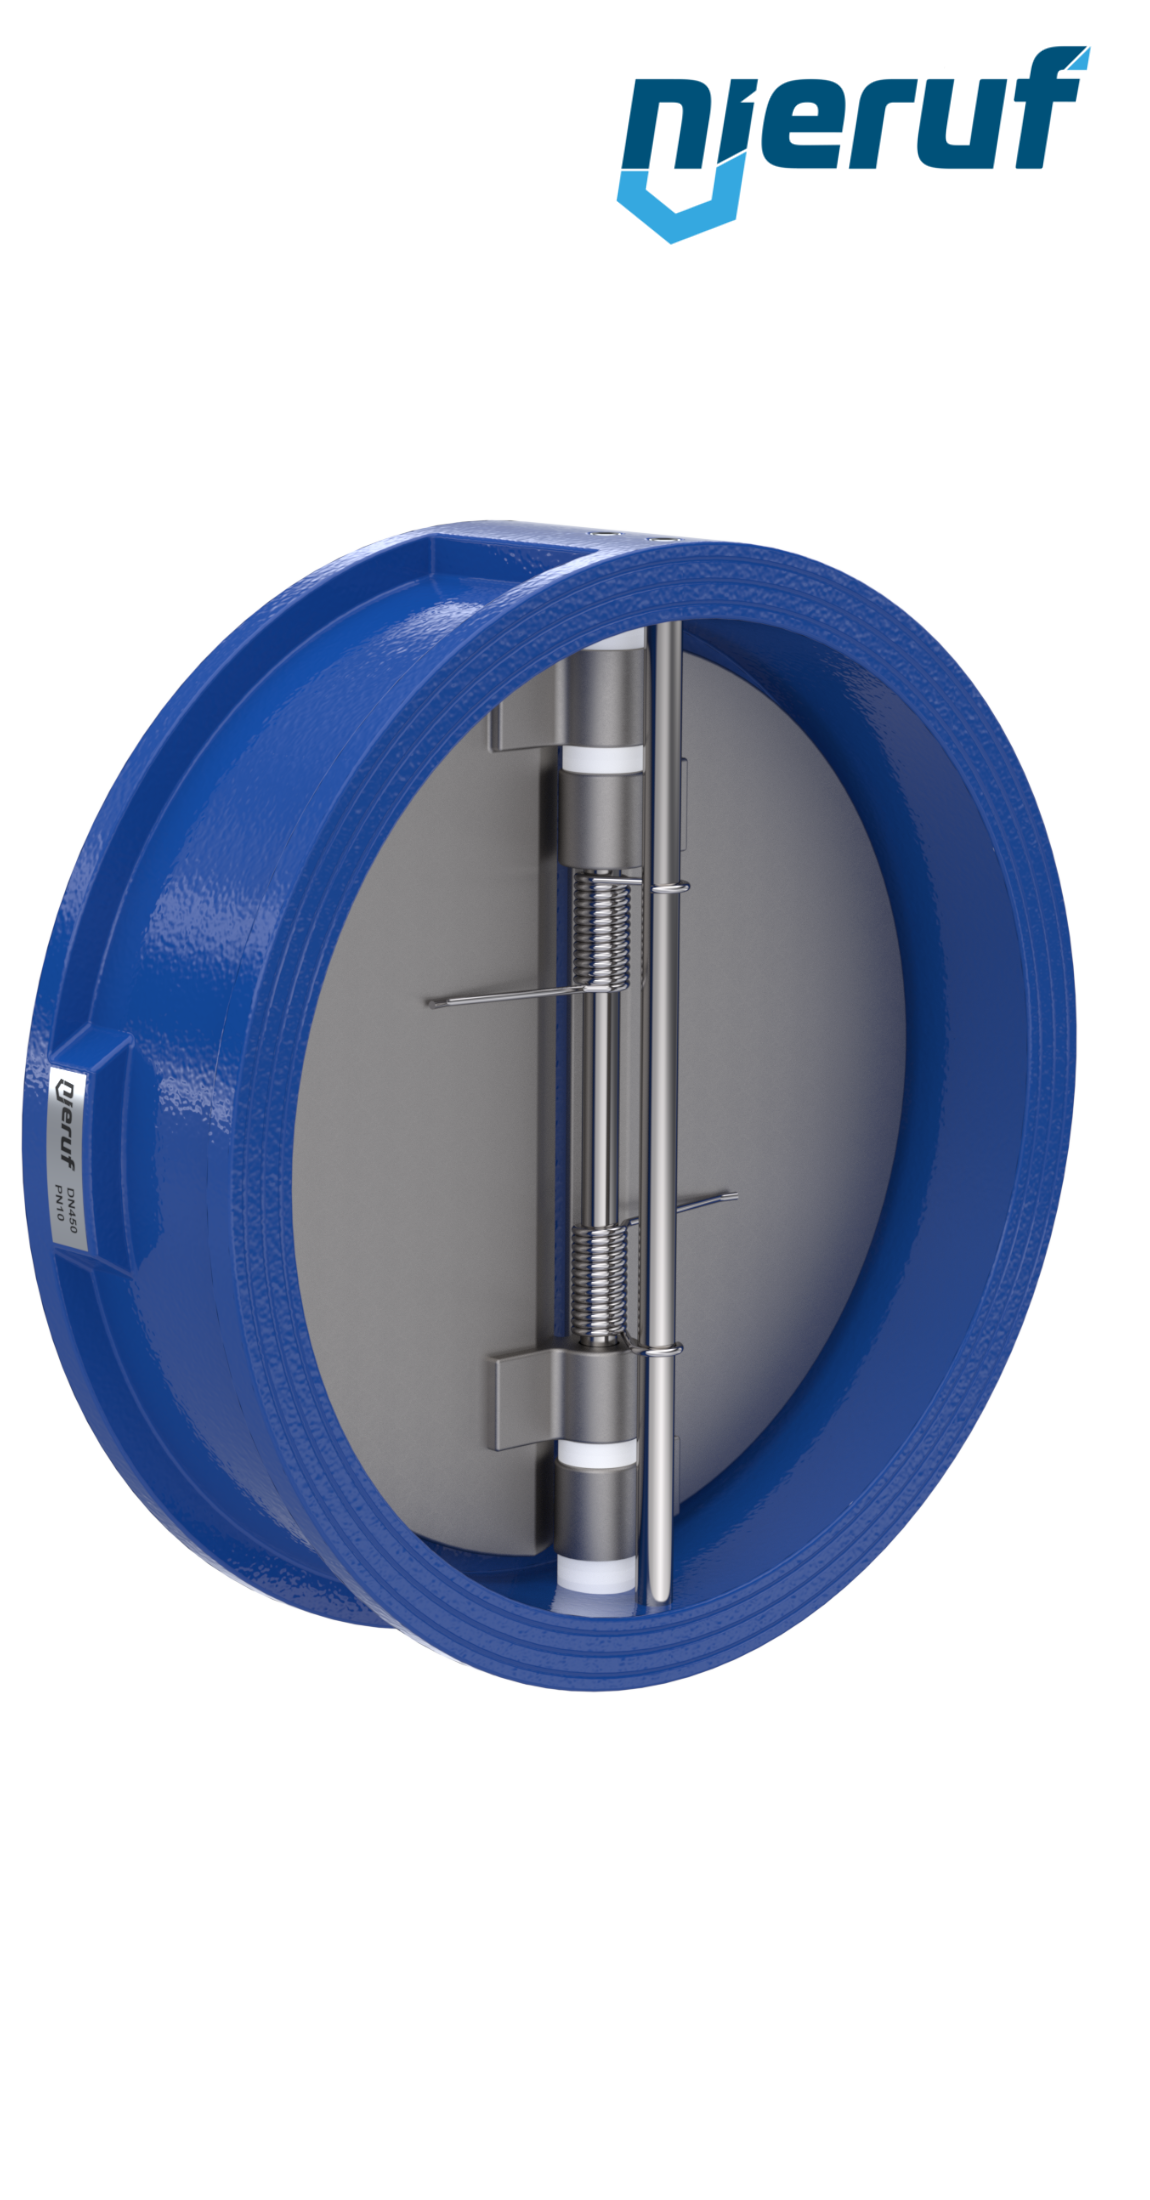 dual plate check valve DN450 DR02 GGG40 epoxyd plated blue 180µm EPDM